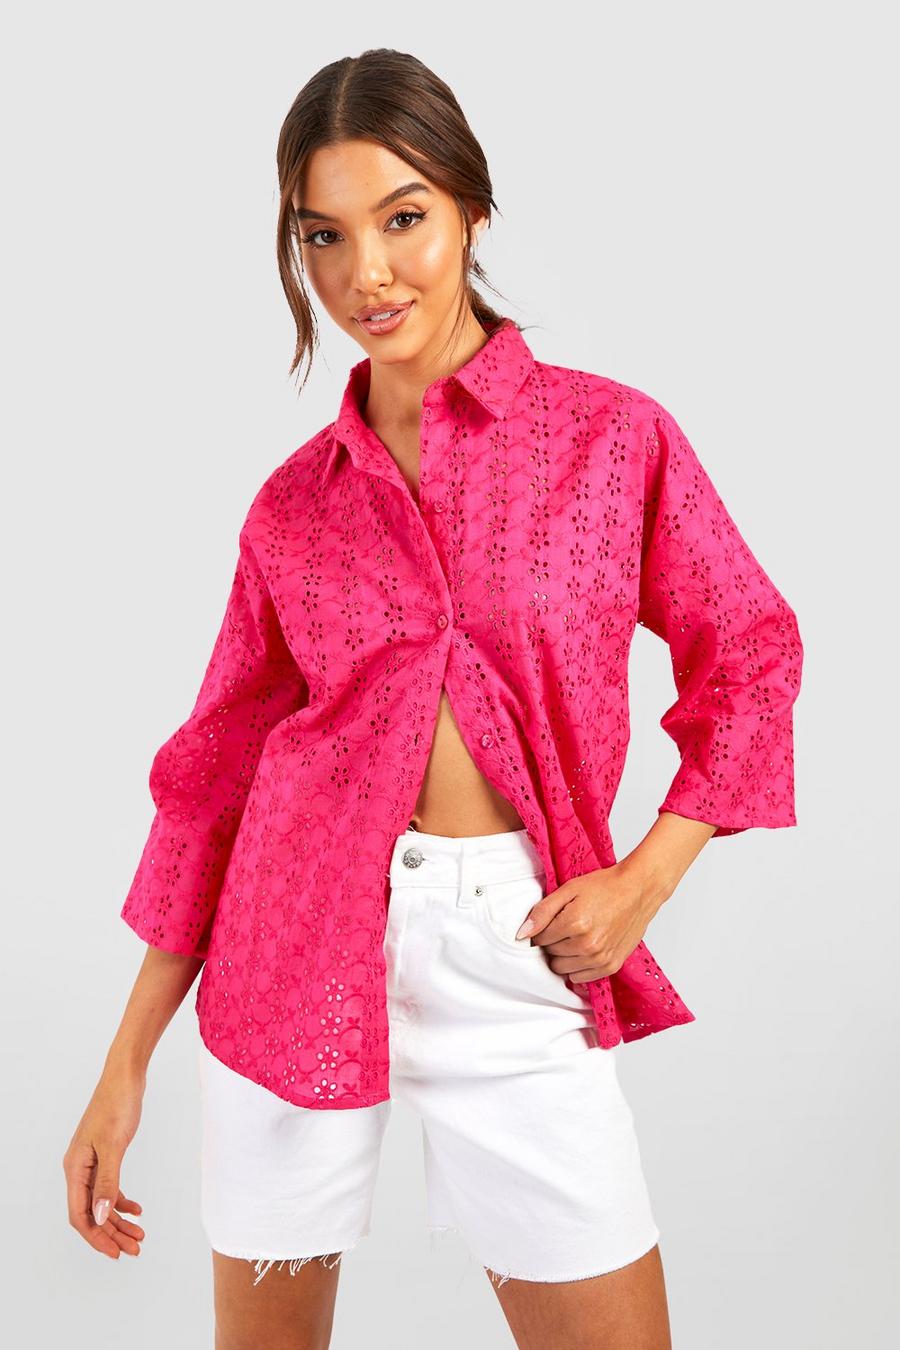 Chemise en broderie anglaise, Hot pink